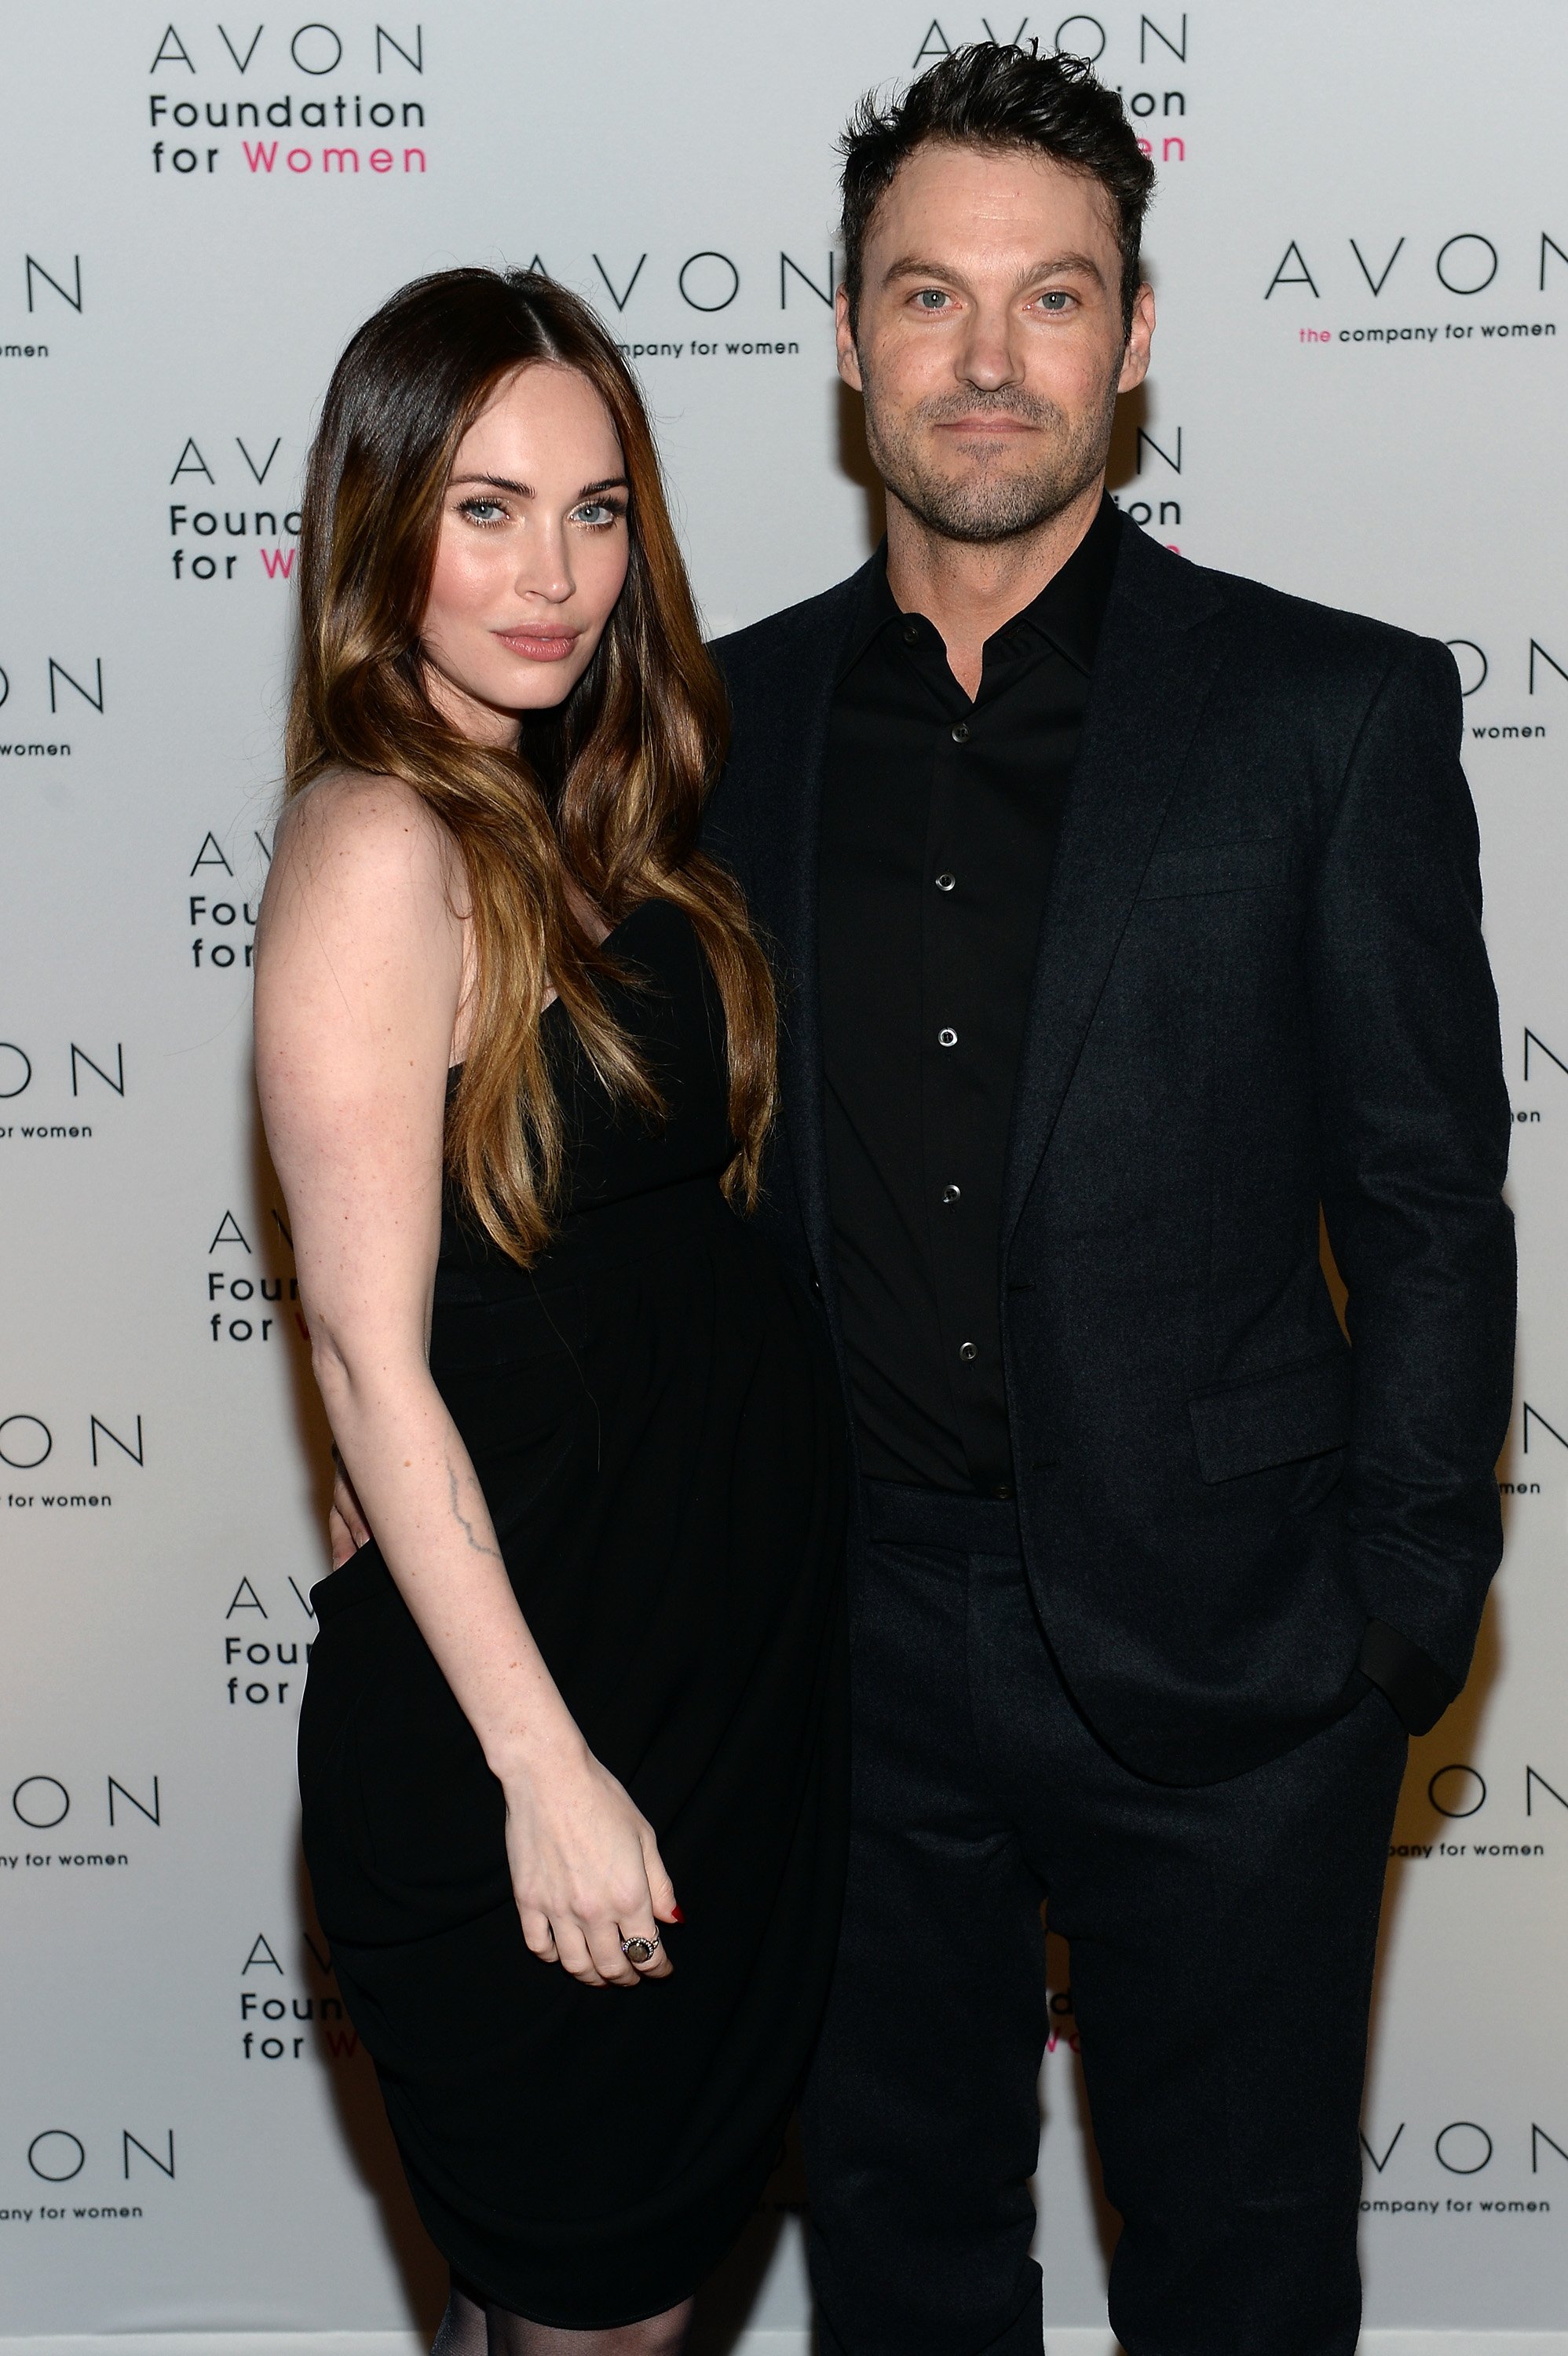 Megan Fox and Brian Austin Green at The Morgan Library & Museum in New York City on November 25, 2013. | Source: Getty Images.